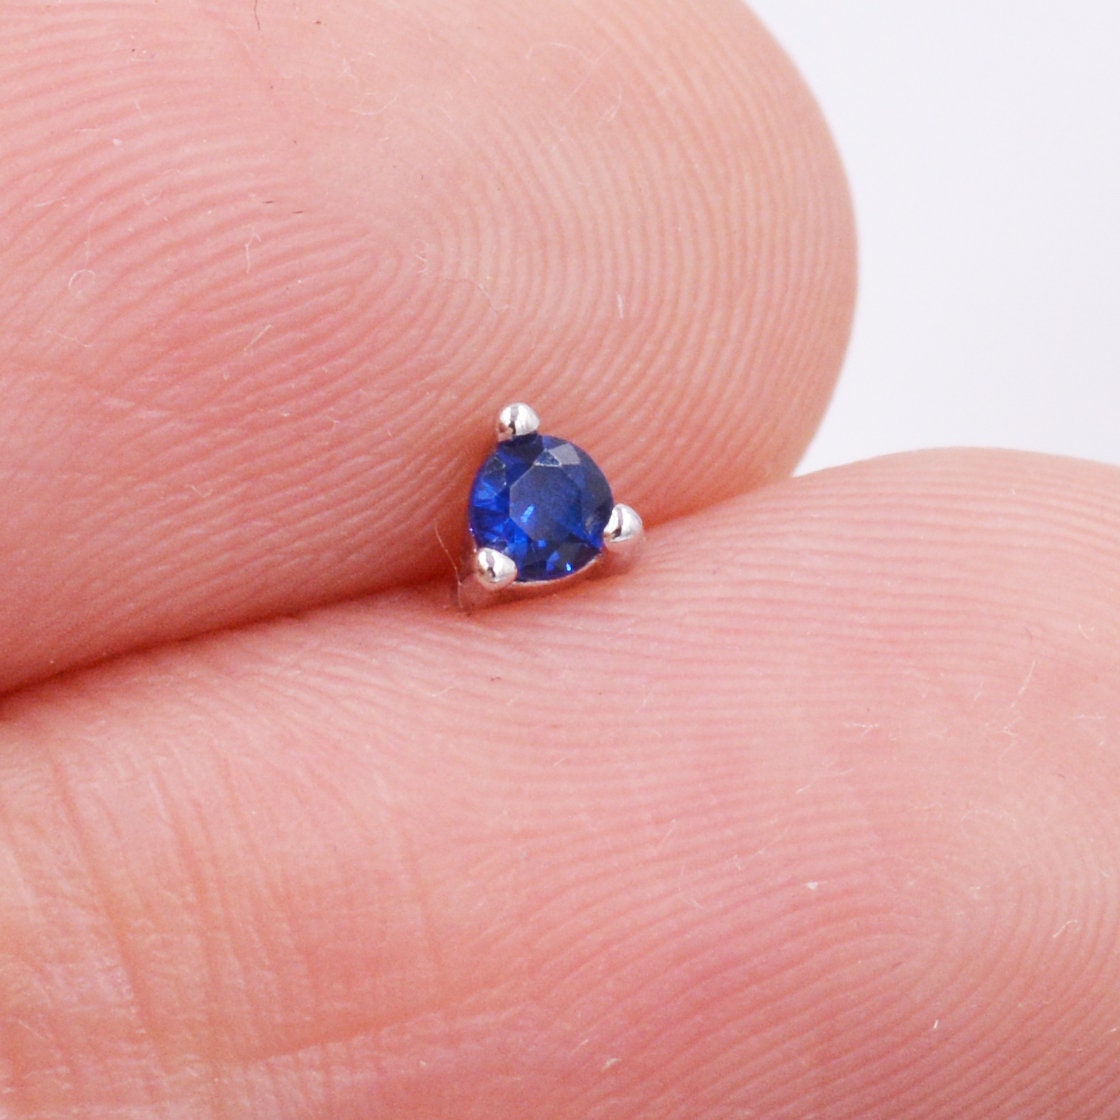 Extra Tiny Sapphire Blue Crystal CZ Stud Earrings in Sterling Silver, Three Prong 3mm Teeny Tiny Stud